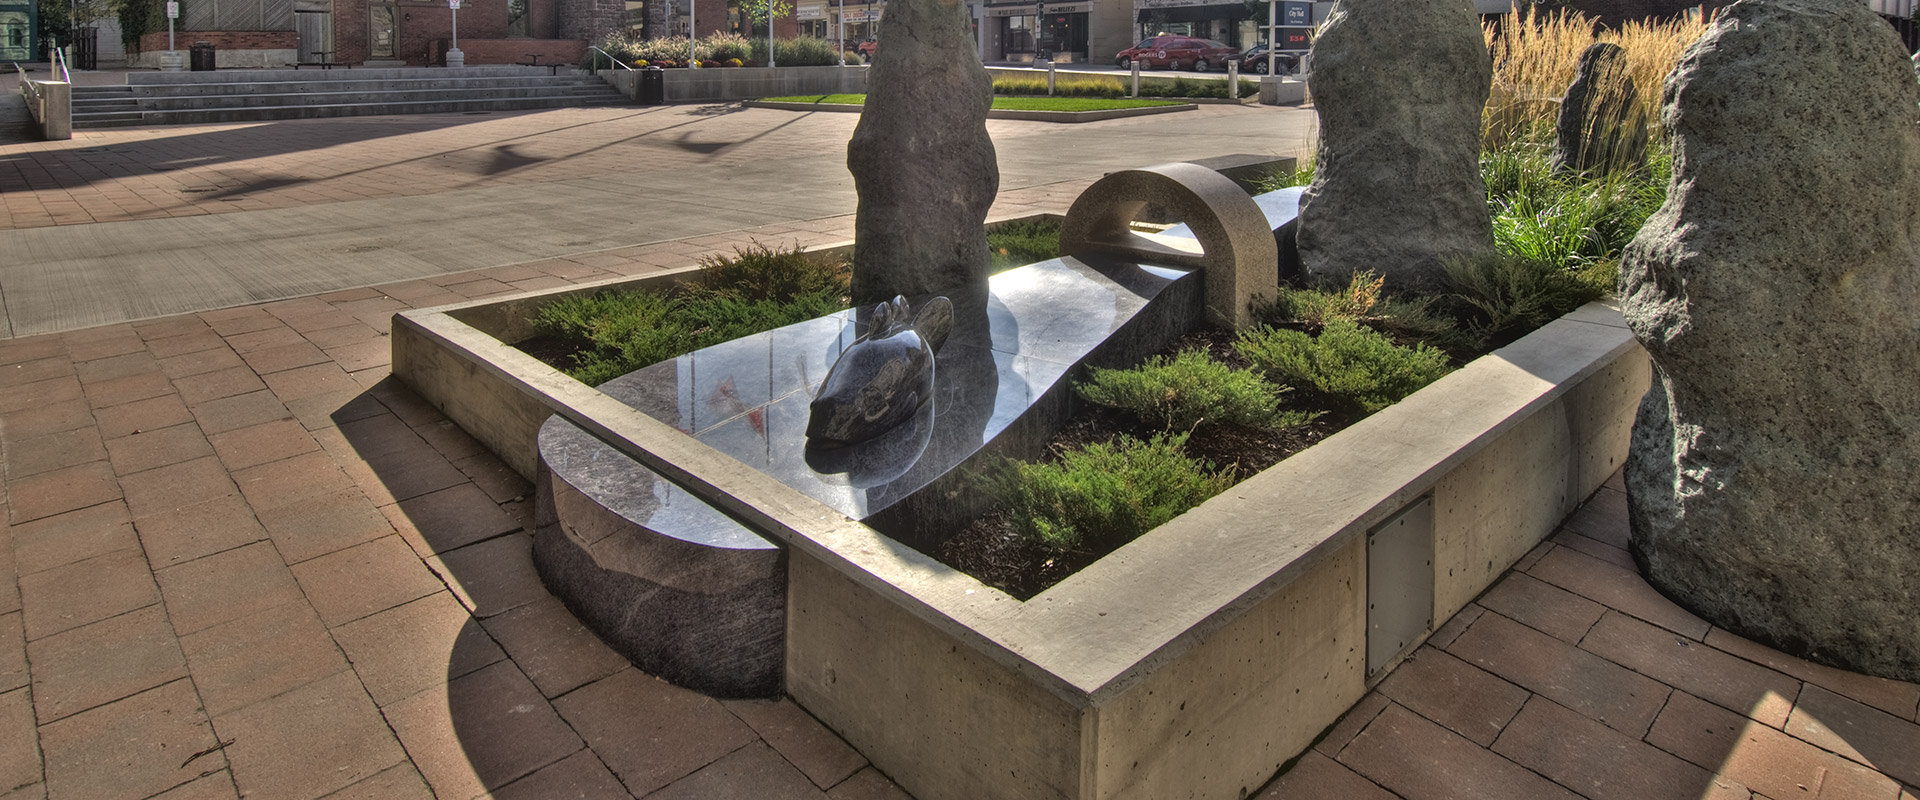 Polished granite art elements from the Indigena Domain project at Cambridge City Hall